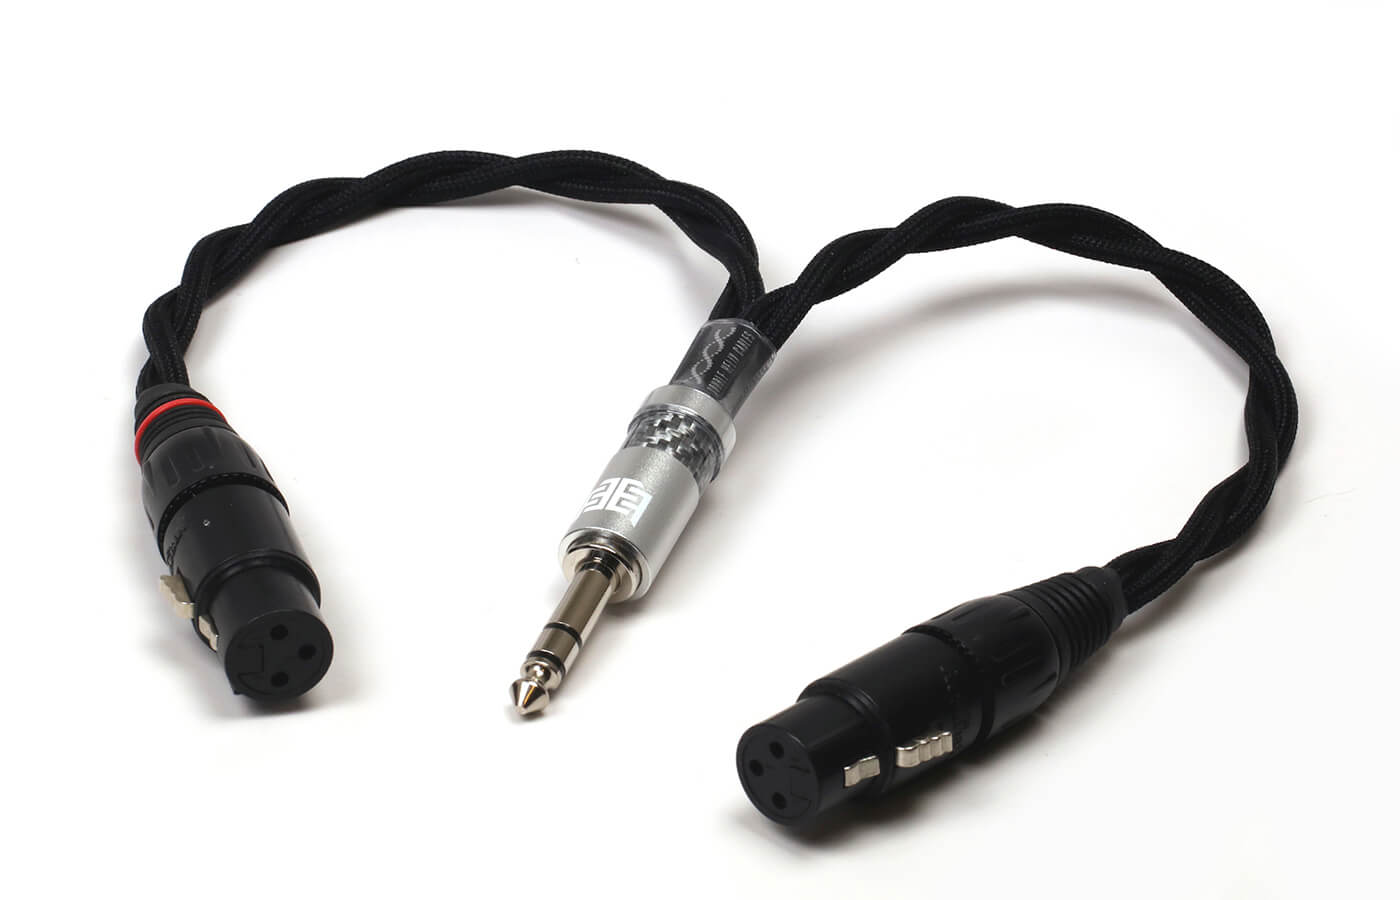 double-helix-cables-dhc-occ-litz-headphone-cable-eidolic-comp4-prion4-adapters